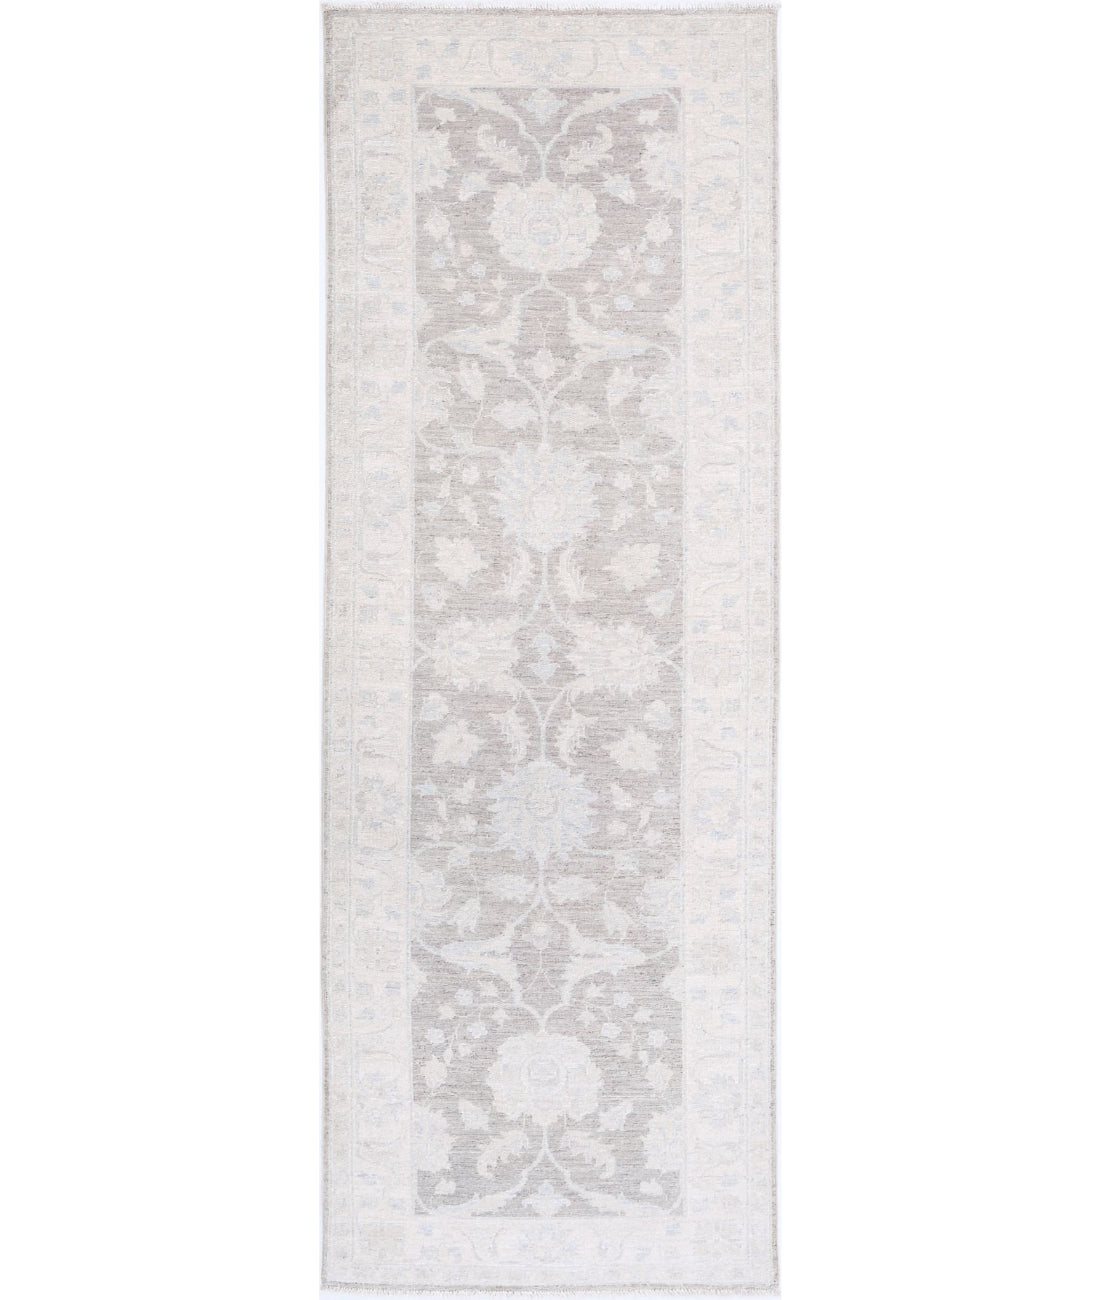 Hand Knotted Serenity Wool Rug - 2'8'' x 8'0'' 2'8'' x 8'0'' (80 X 240) / Brown / Ivory